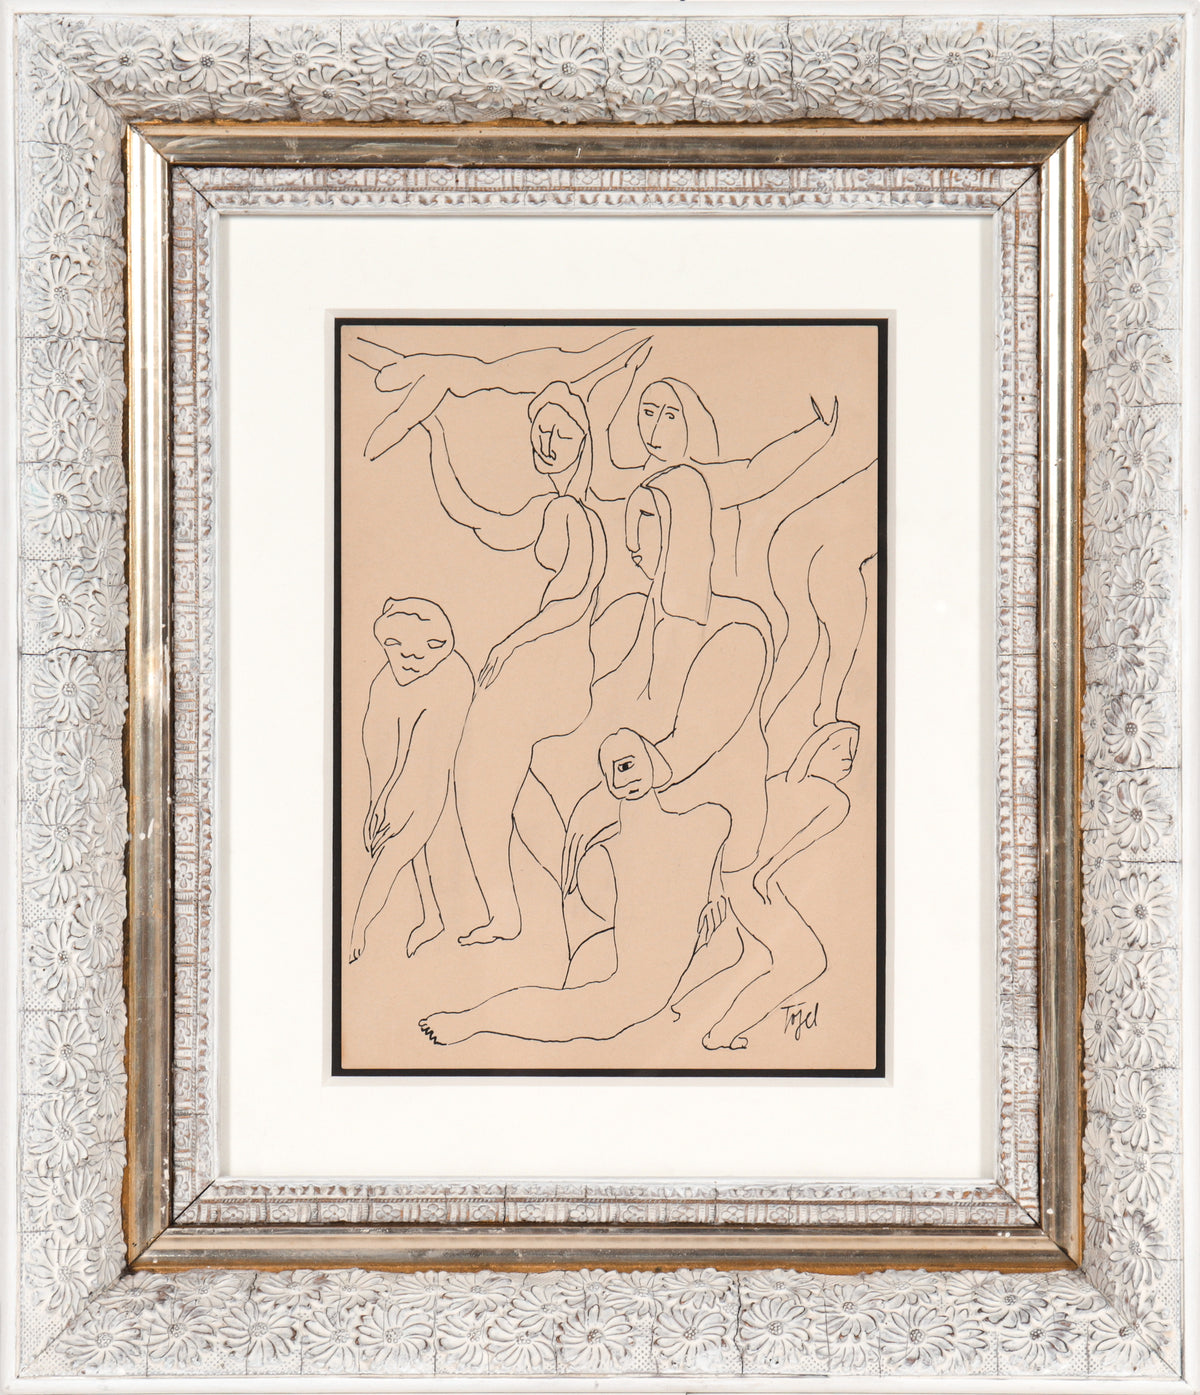 Expressionist Linear Figures &lt;br&gt;Early-Mid 20th Century Ink &lt;br&gt;&lt;br&gt;#11792